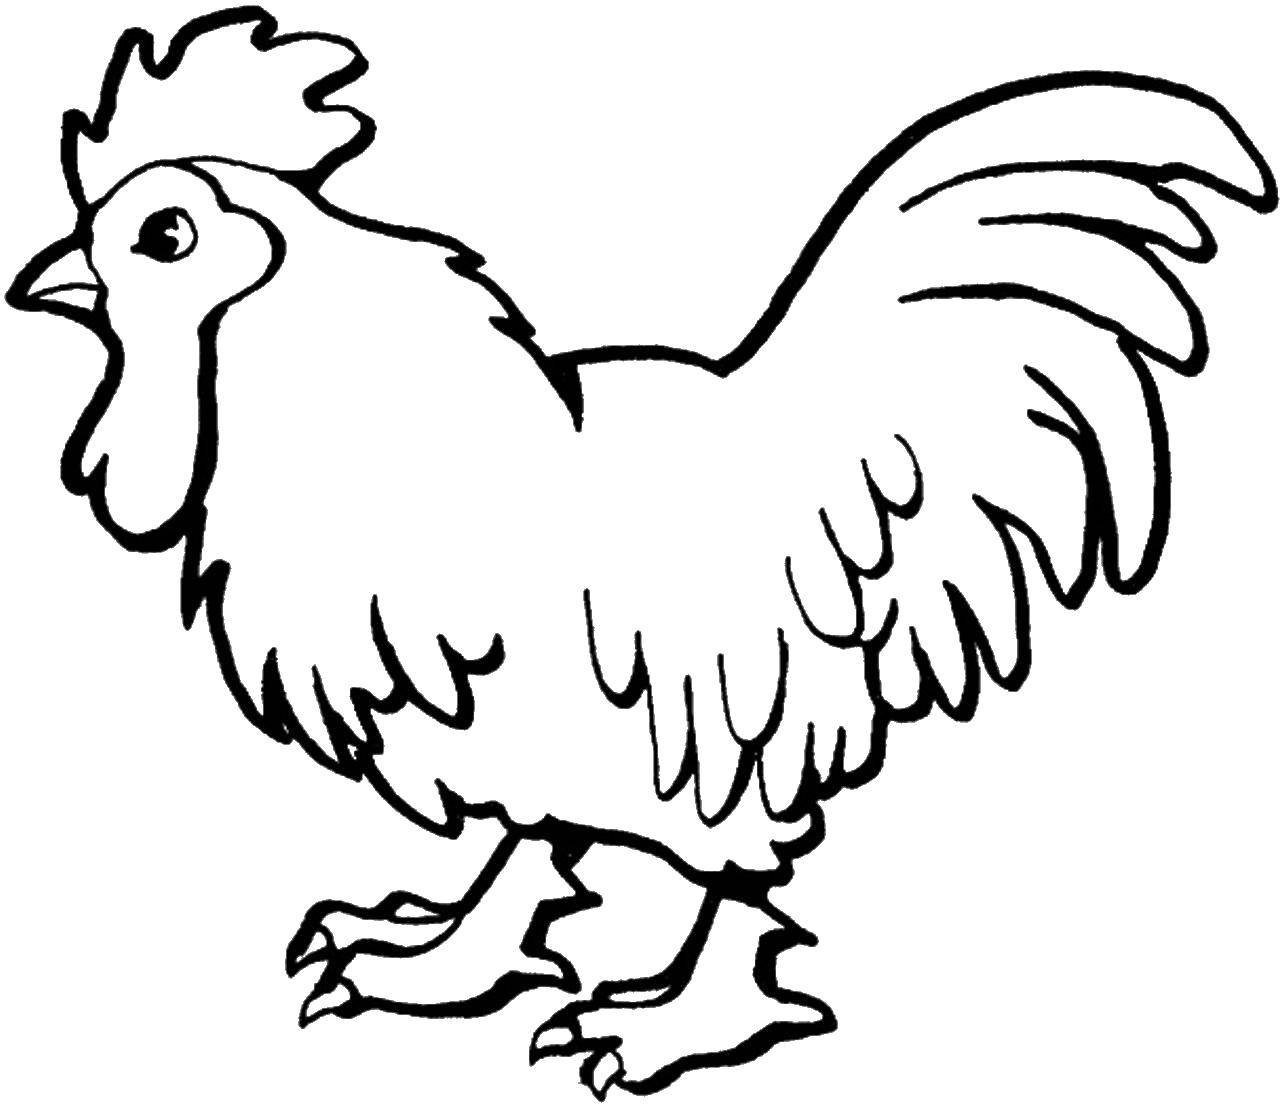 Coloring Cock. Category Coloring pages for kids. Tags:  poultry, rooster, animal.